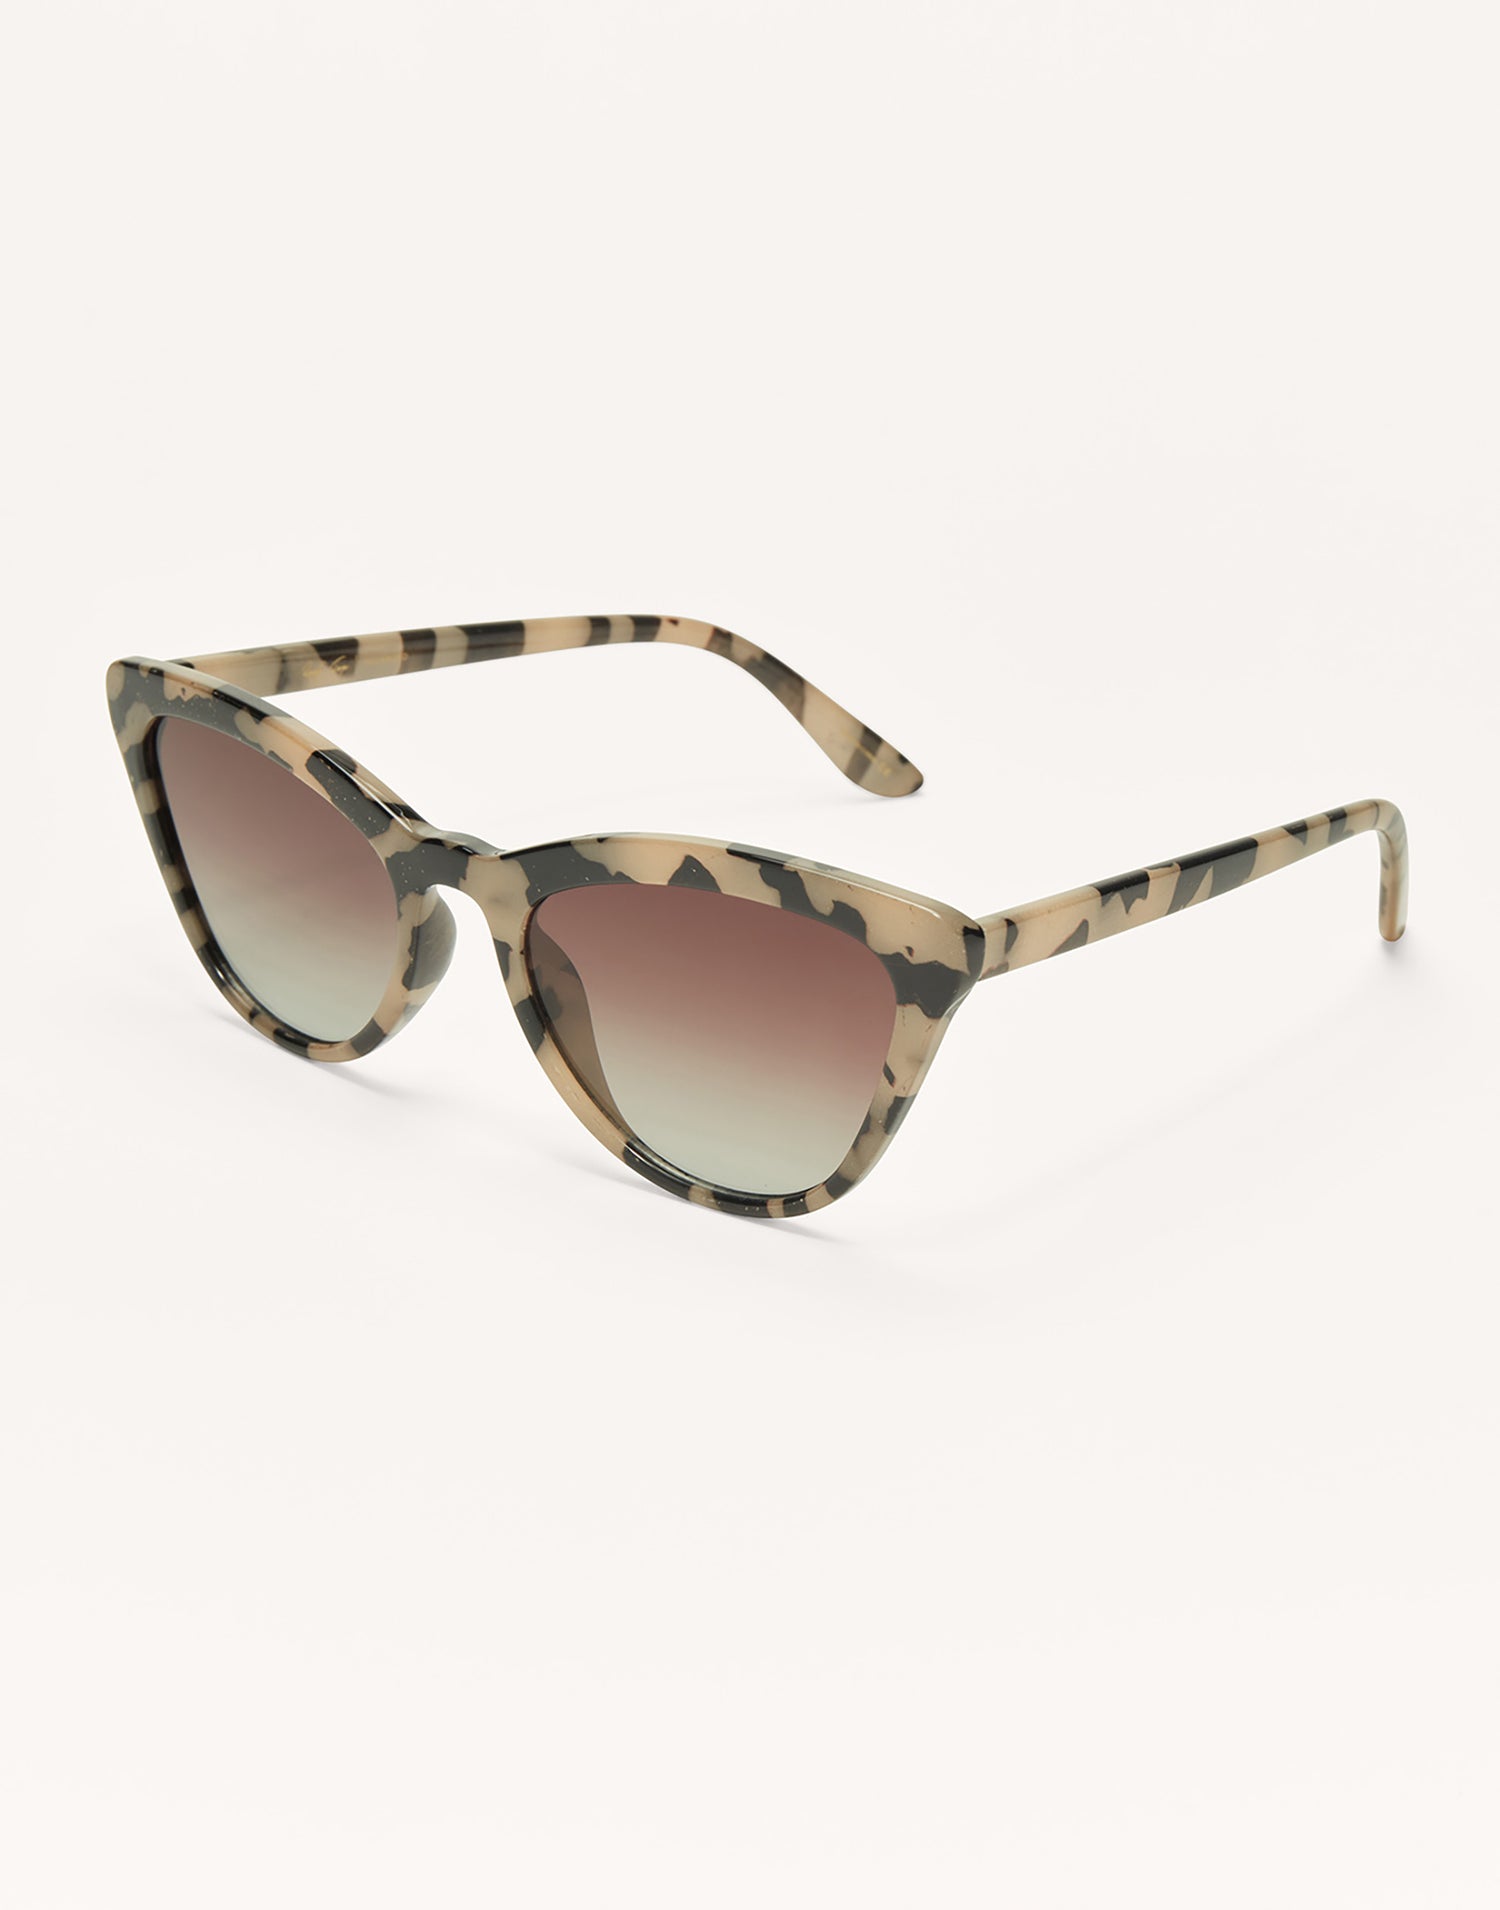 Rooftop Sunglasses by Z Supply in Brown Tortoise - Angled View